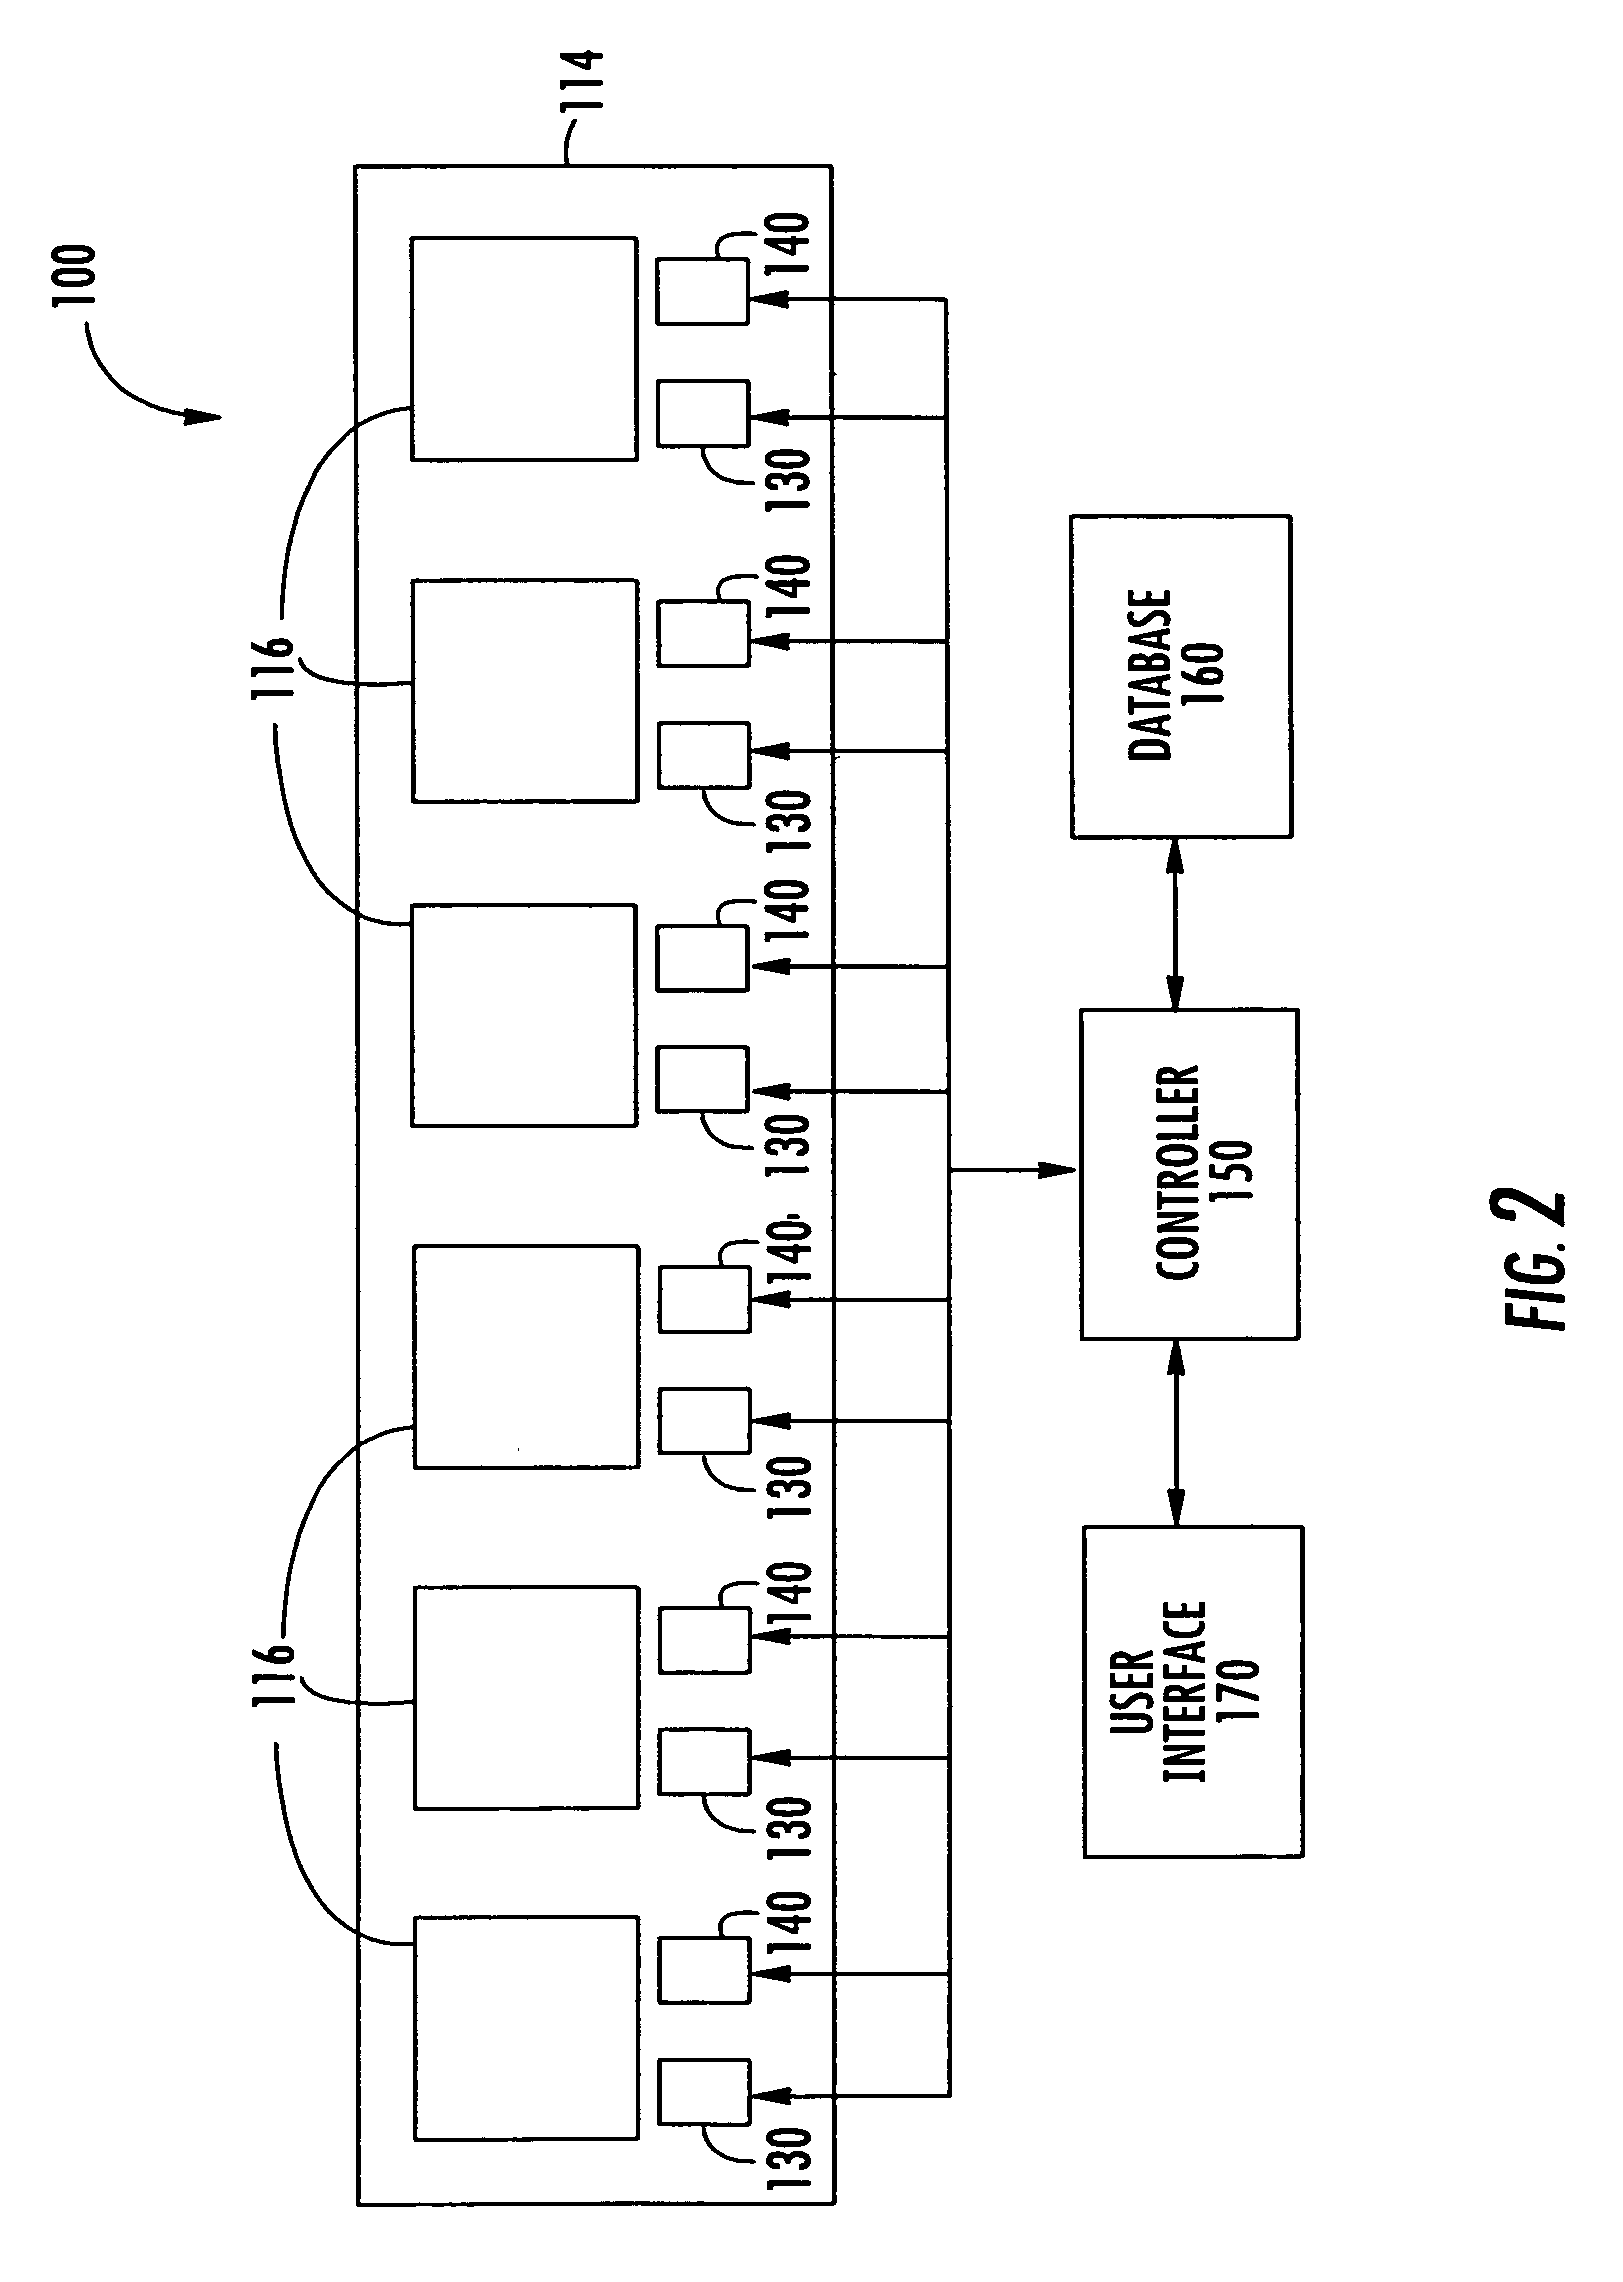 Telecommunications patching system that facilitates detection and identification of patch cords